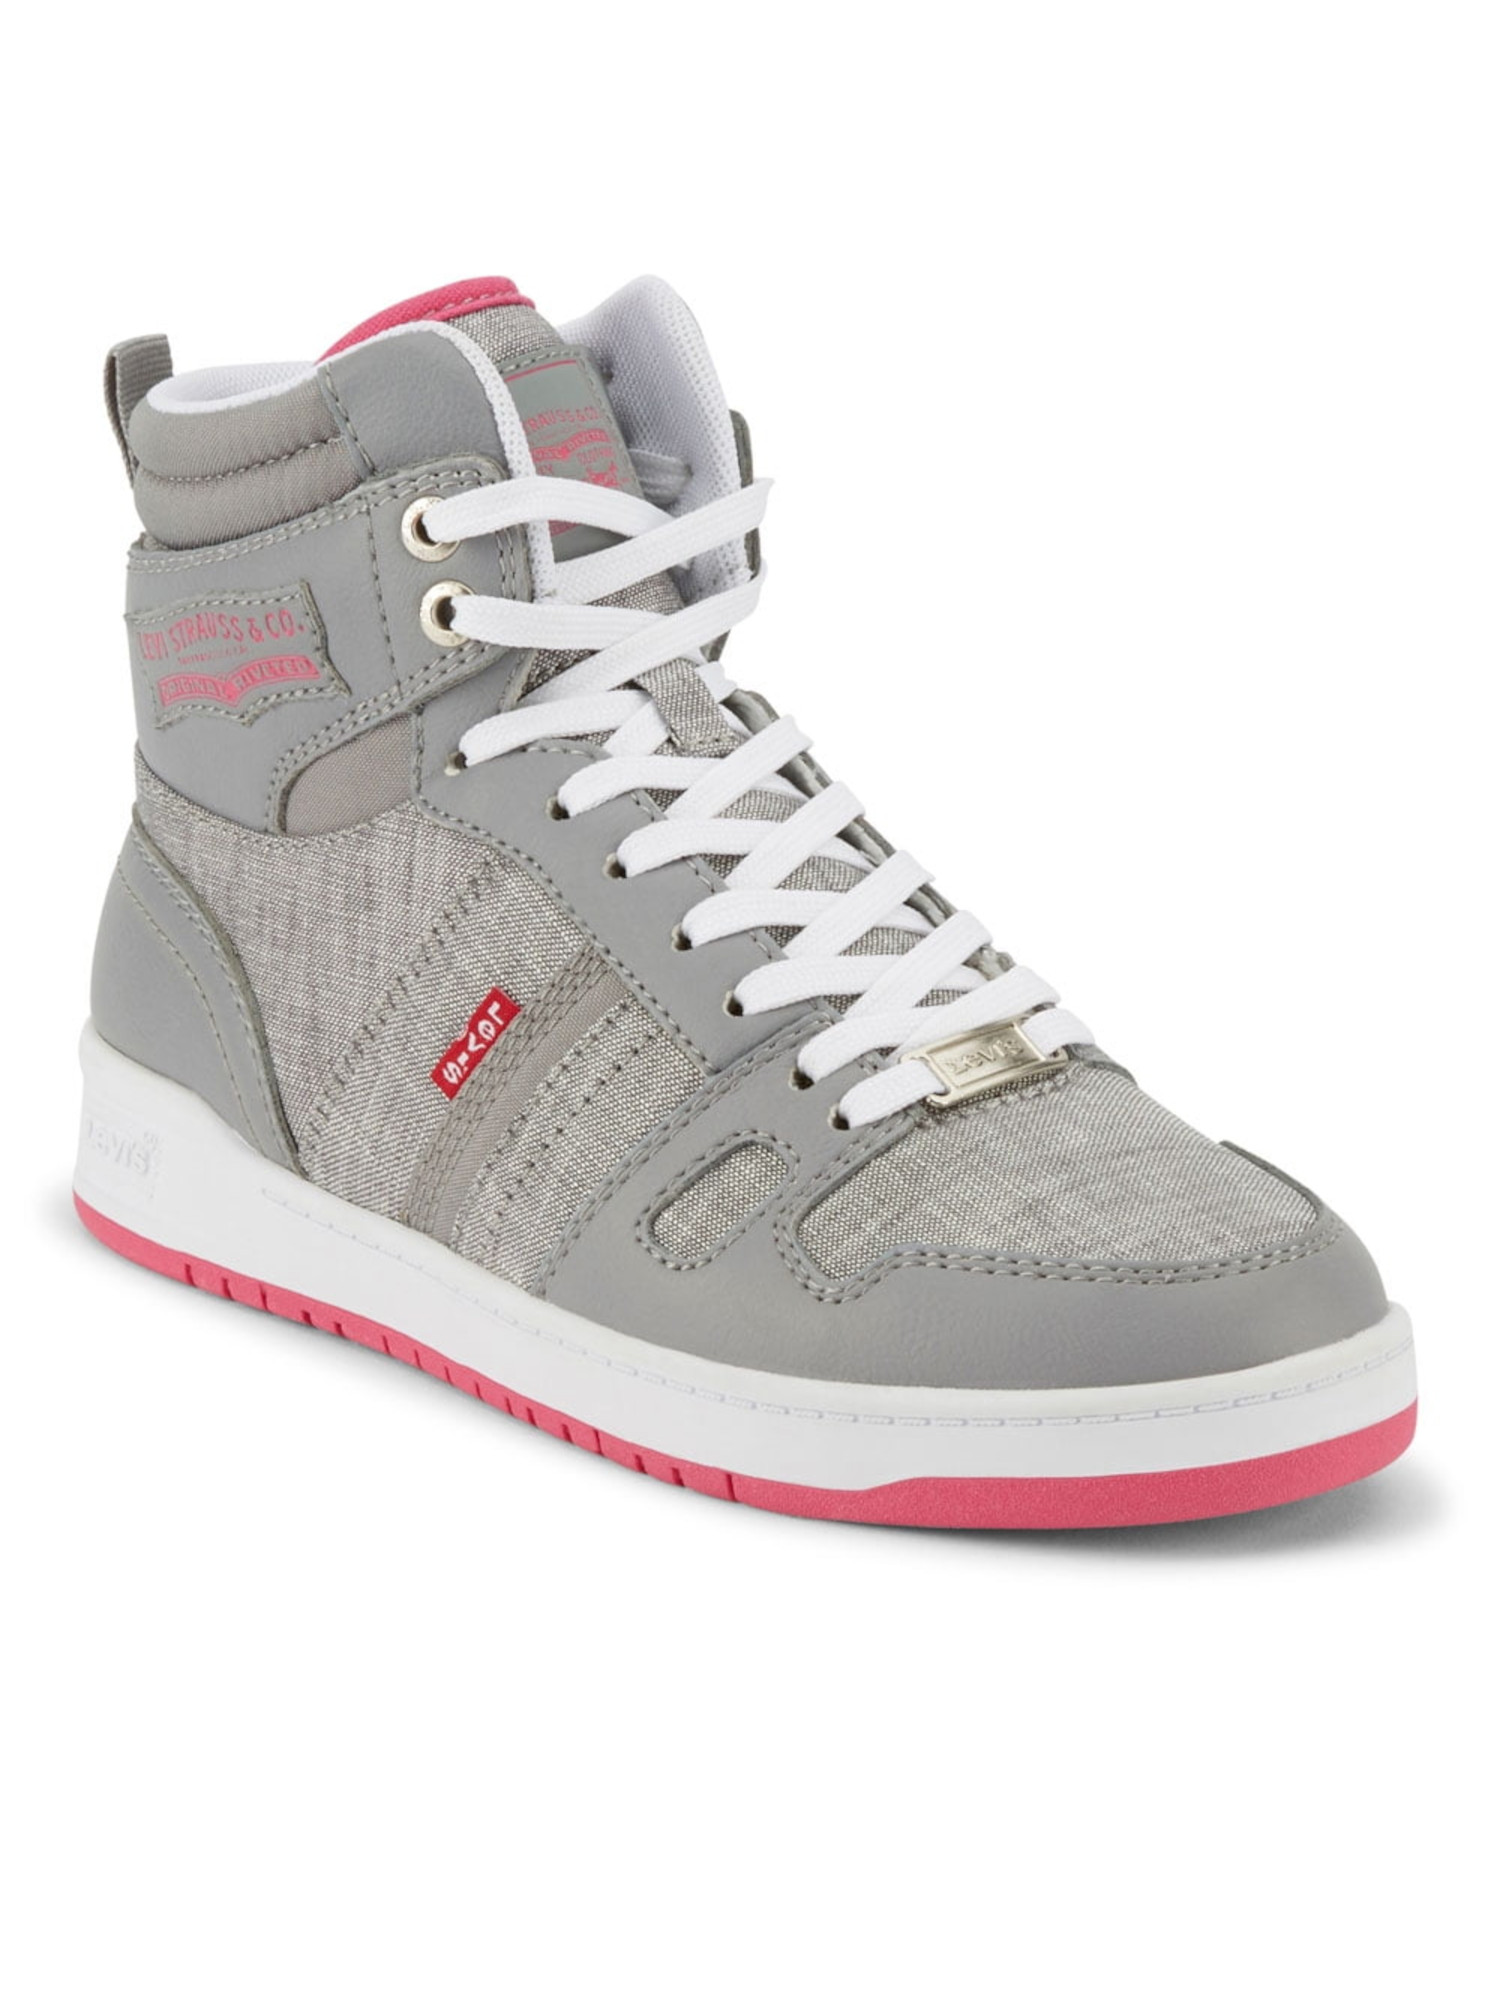 LEVI'S Womens Gray Mixed Media Cushioned 1-1/2" Platform Removable Insole Logo Bb Hi Round Toe Wedge Lace-Up Sneakers Shoes 9 M